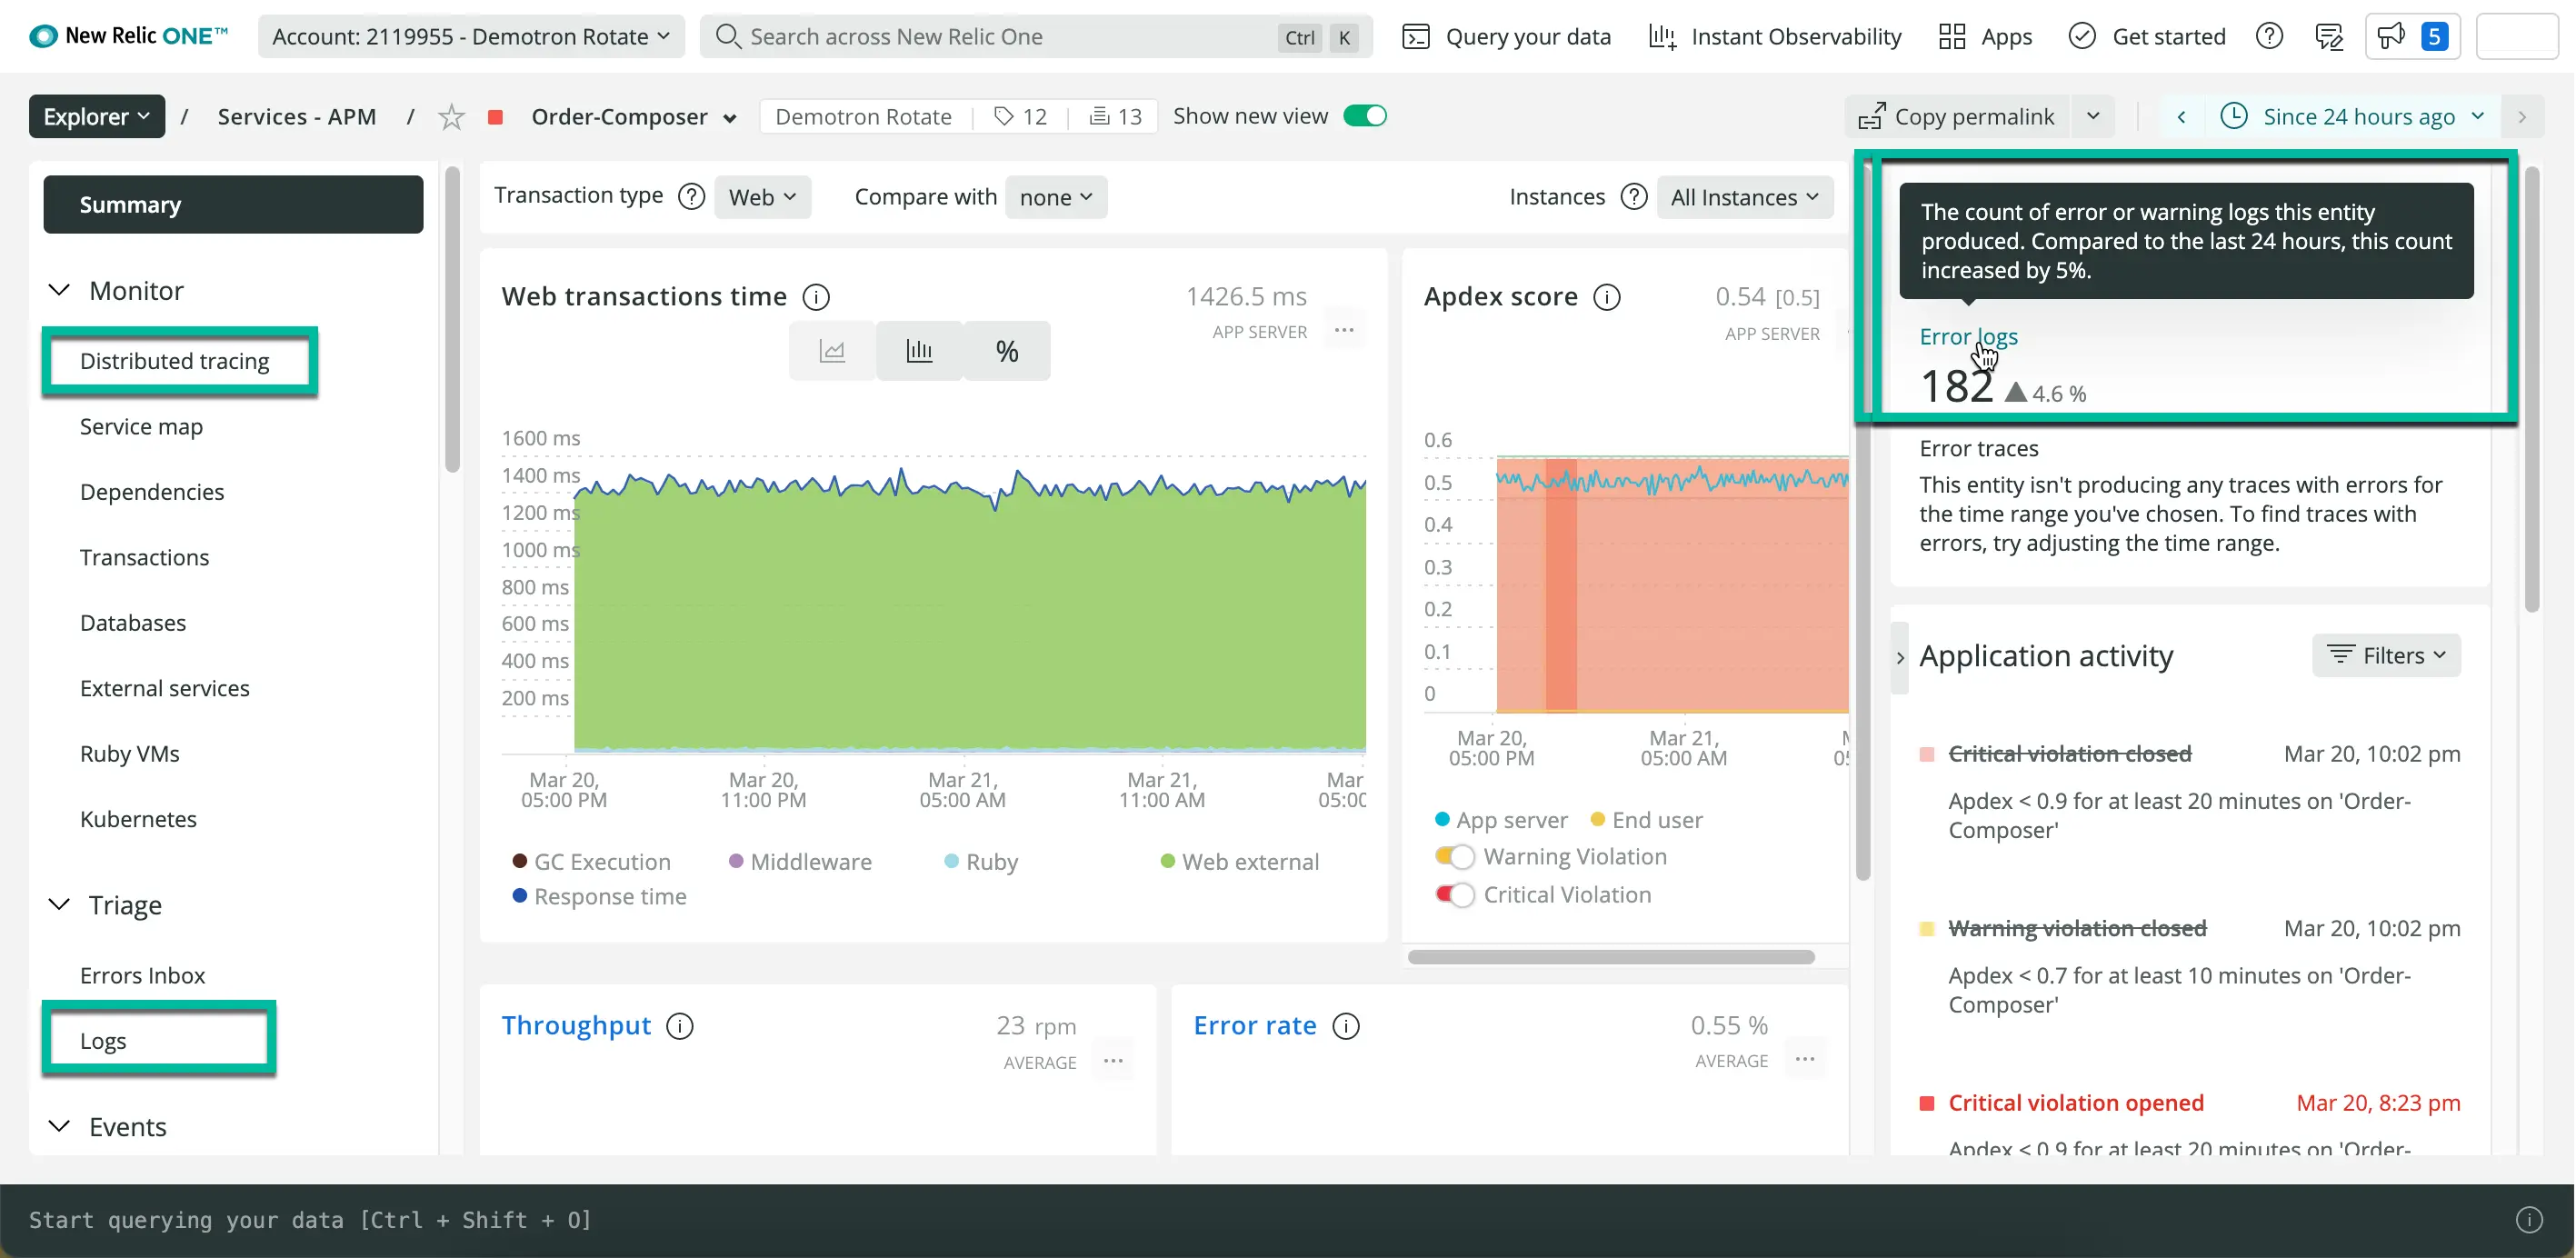 Logs everywhere in New Relic One